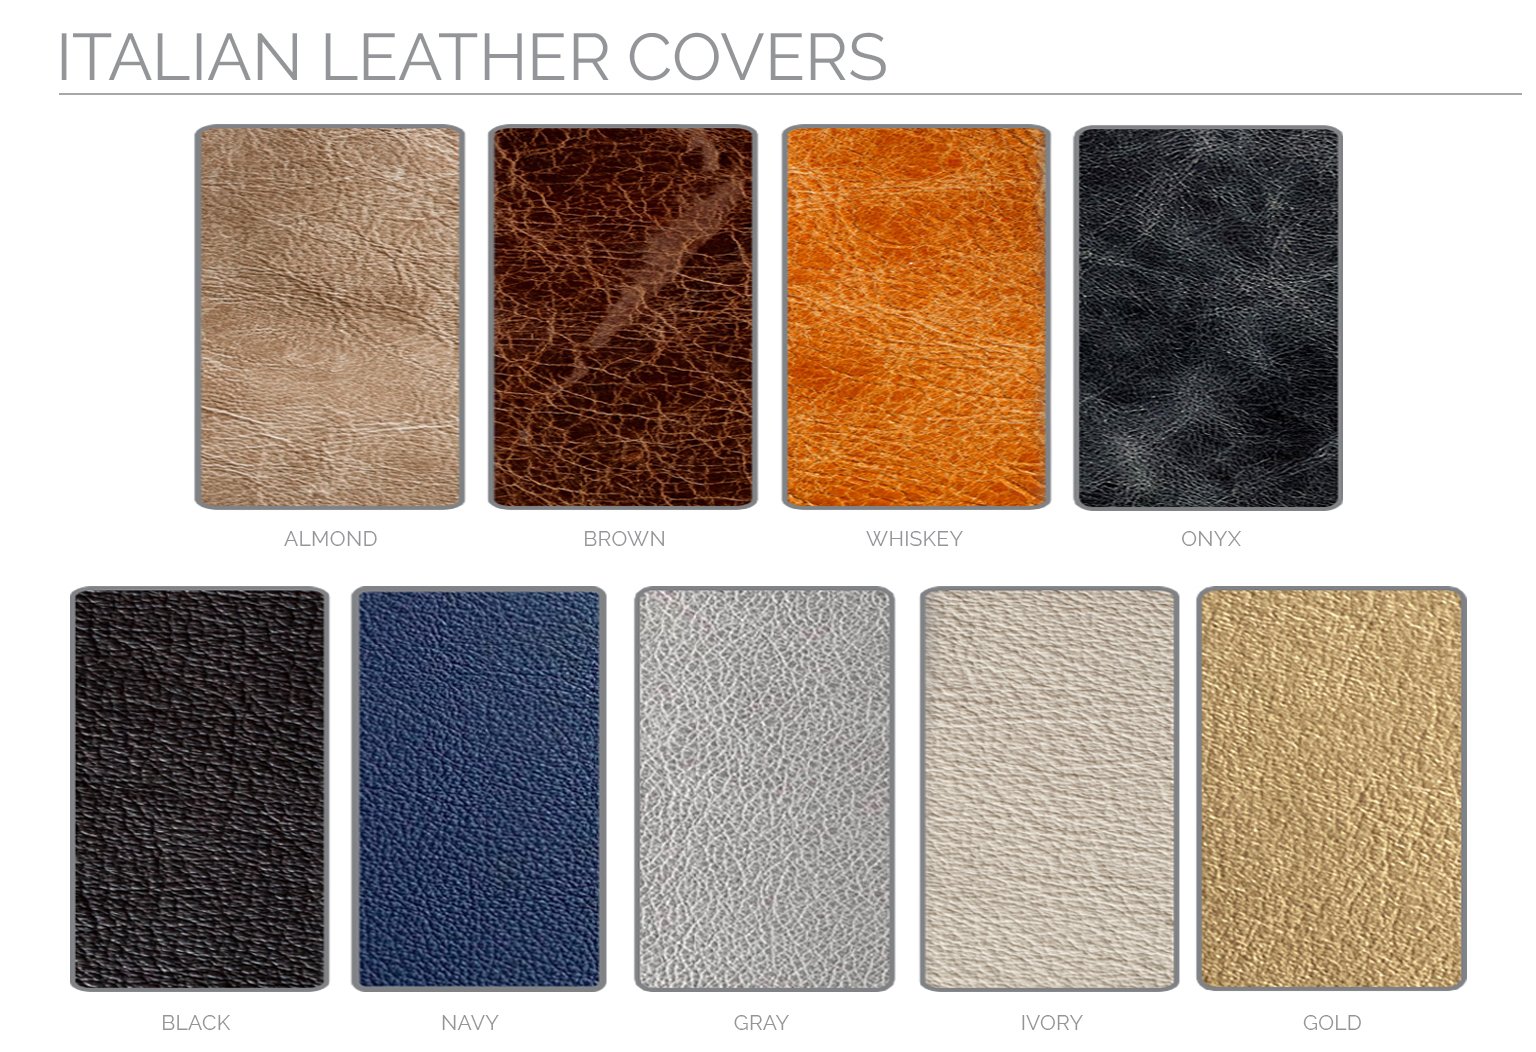 9 Italian Leather Cover Options